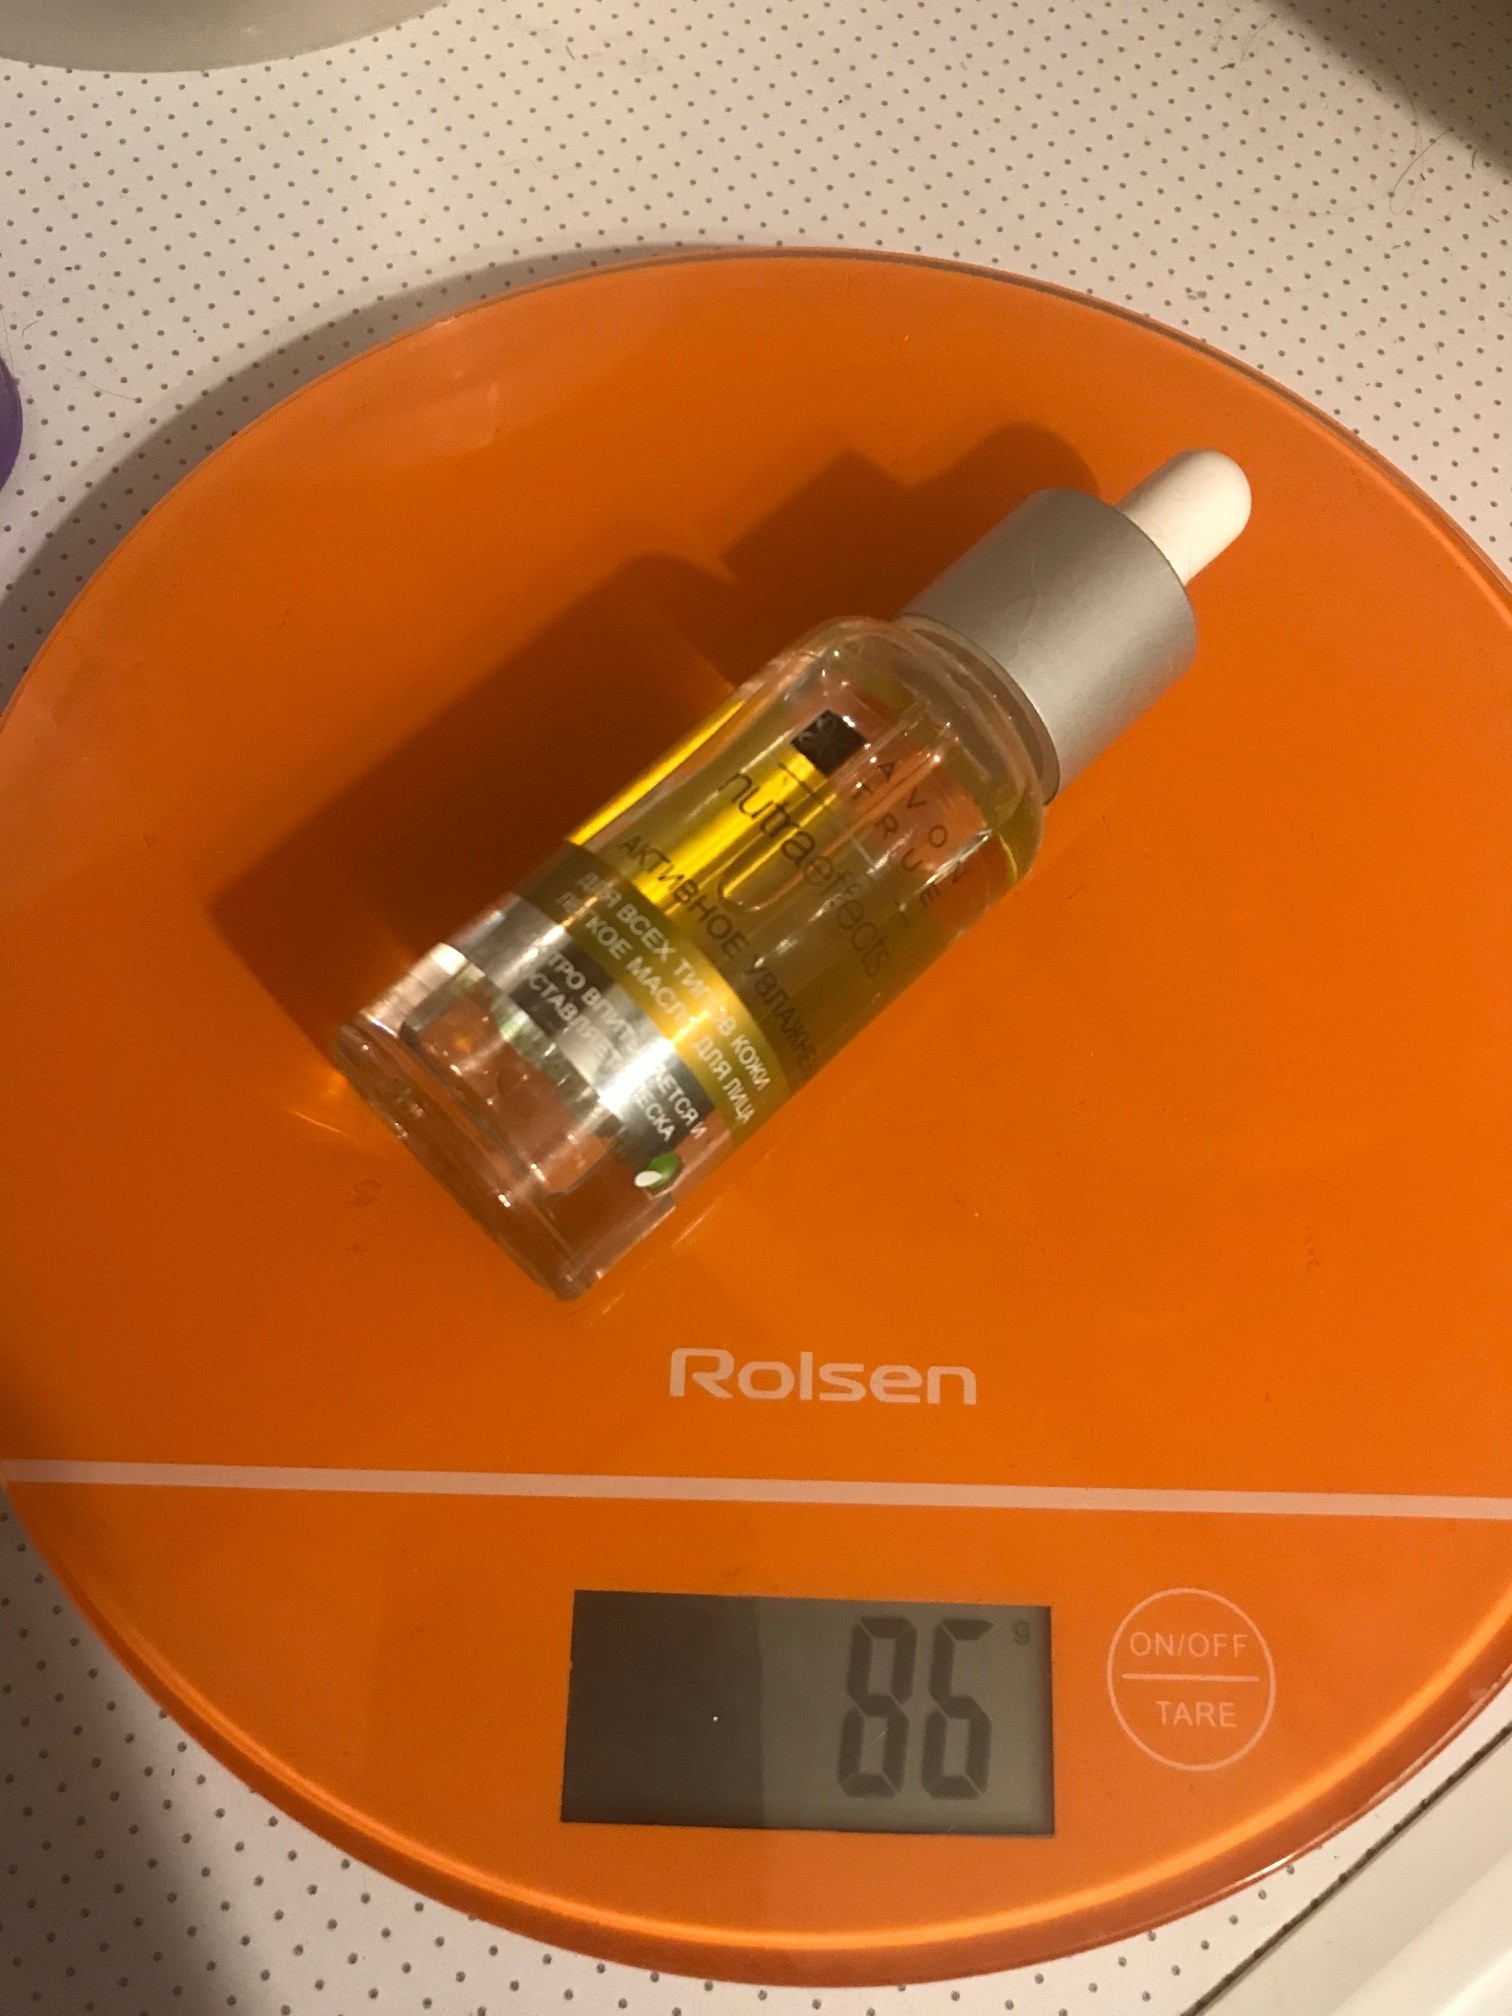 How much does the face serum weigh?